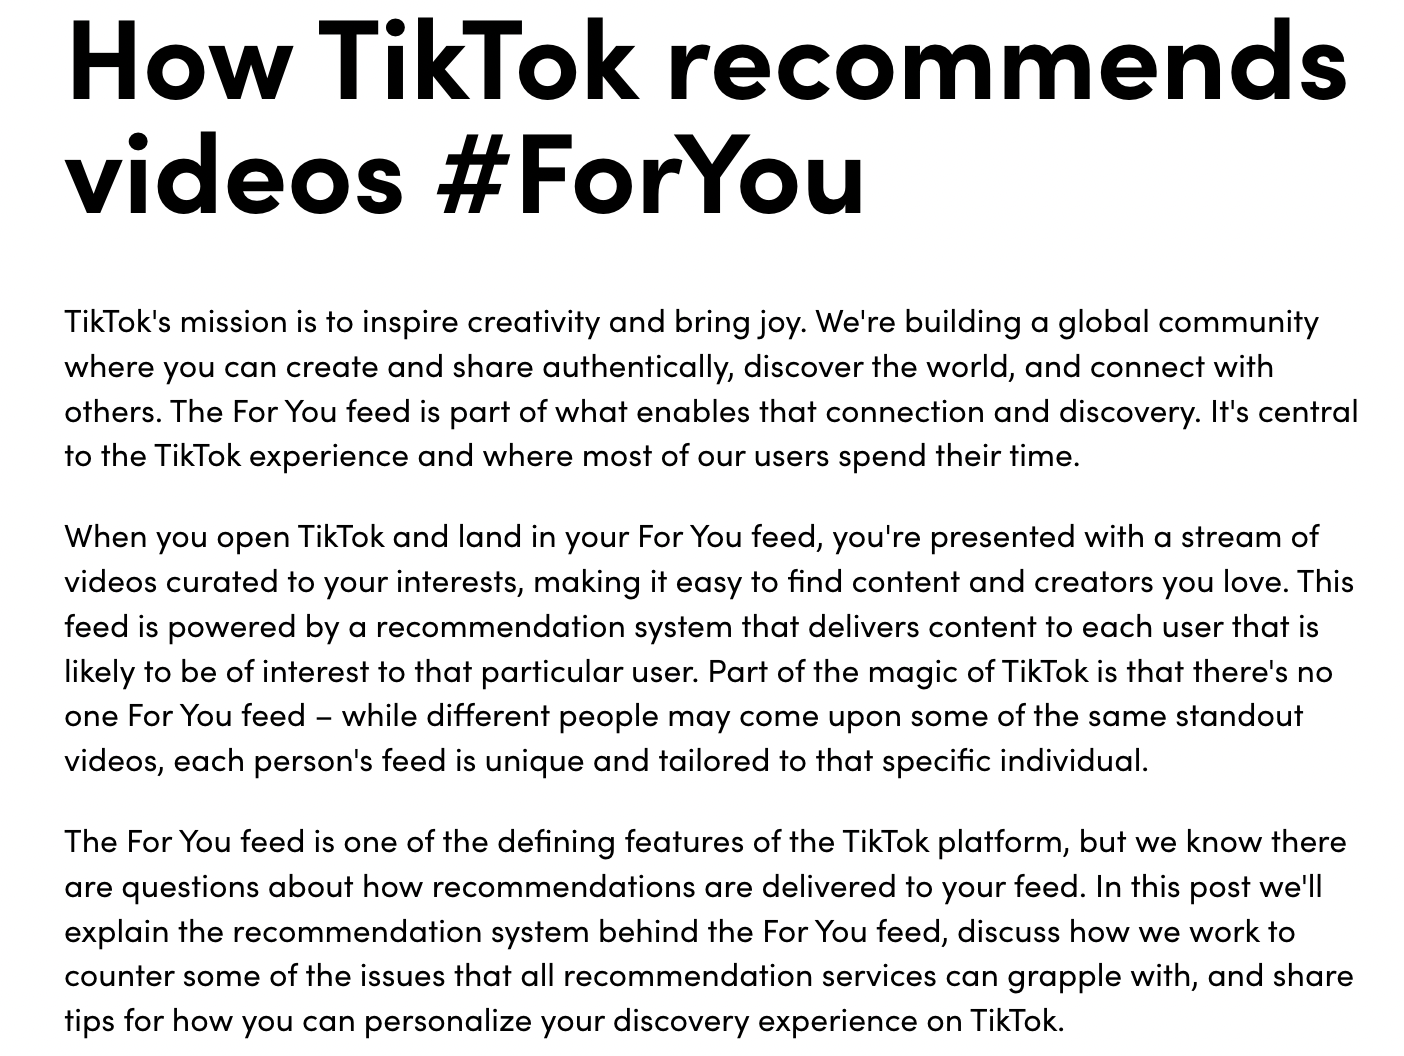 "How TikTok recommends videos #ForYou" page